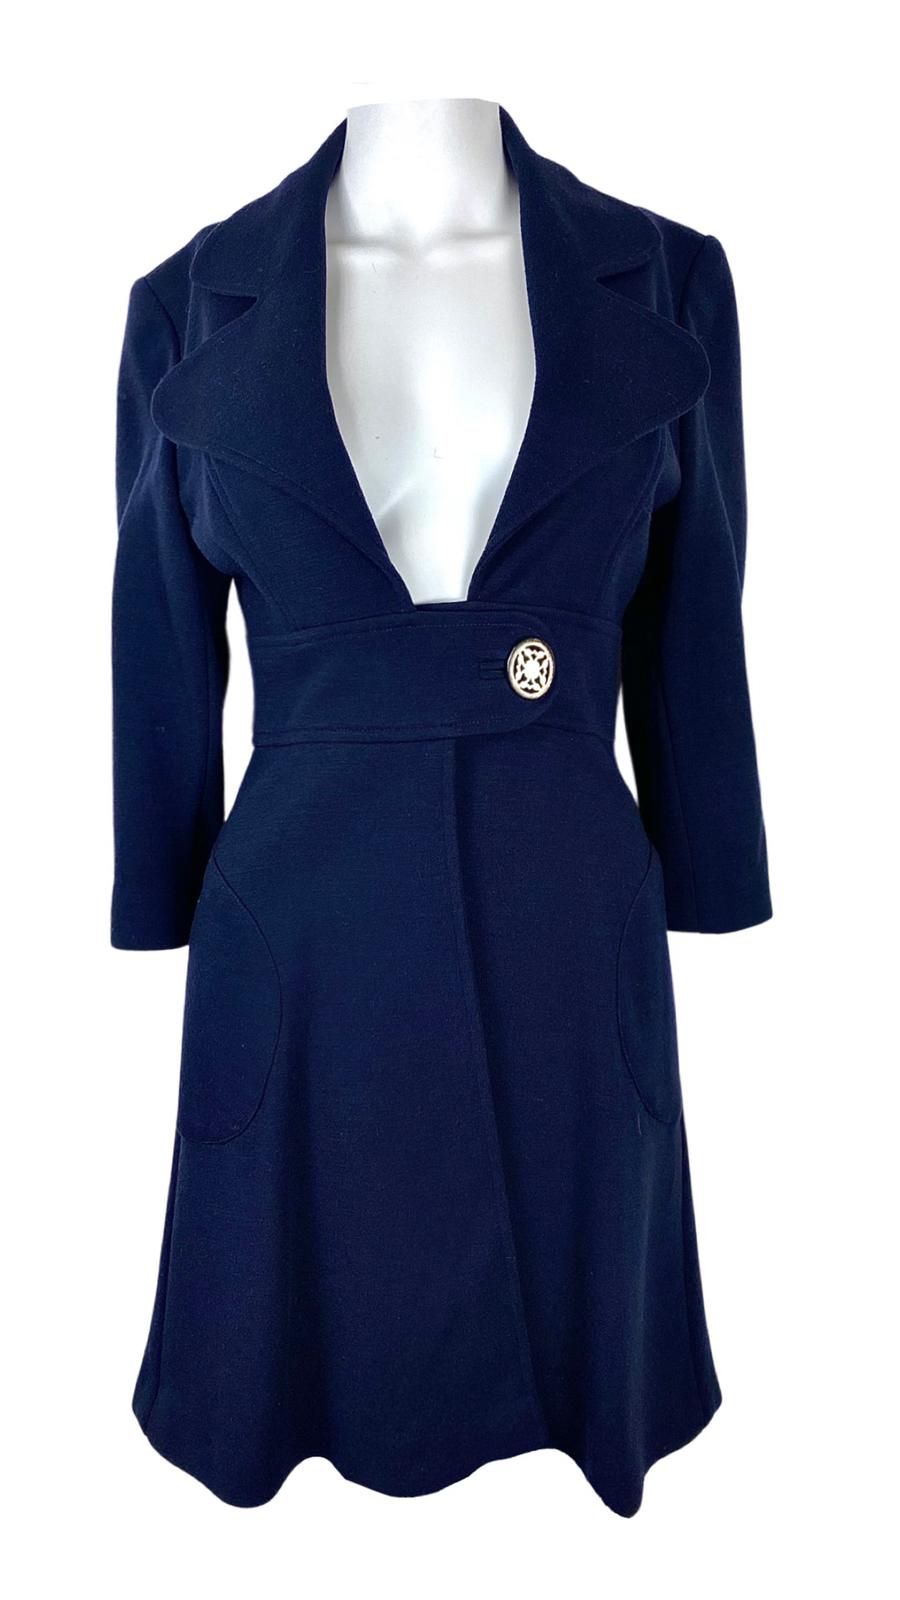 Gorgeous Navy Coat from Goat UK 8 - US 4-The Freperie